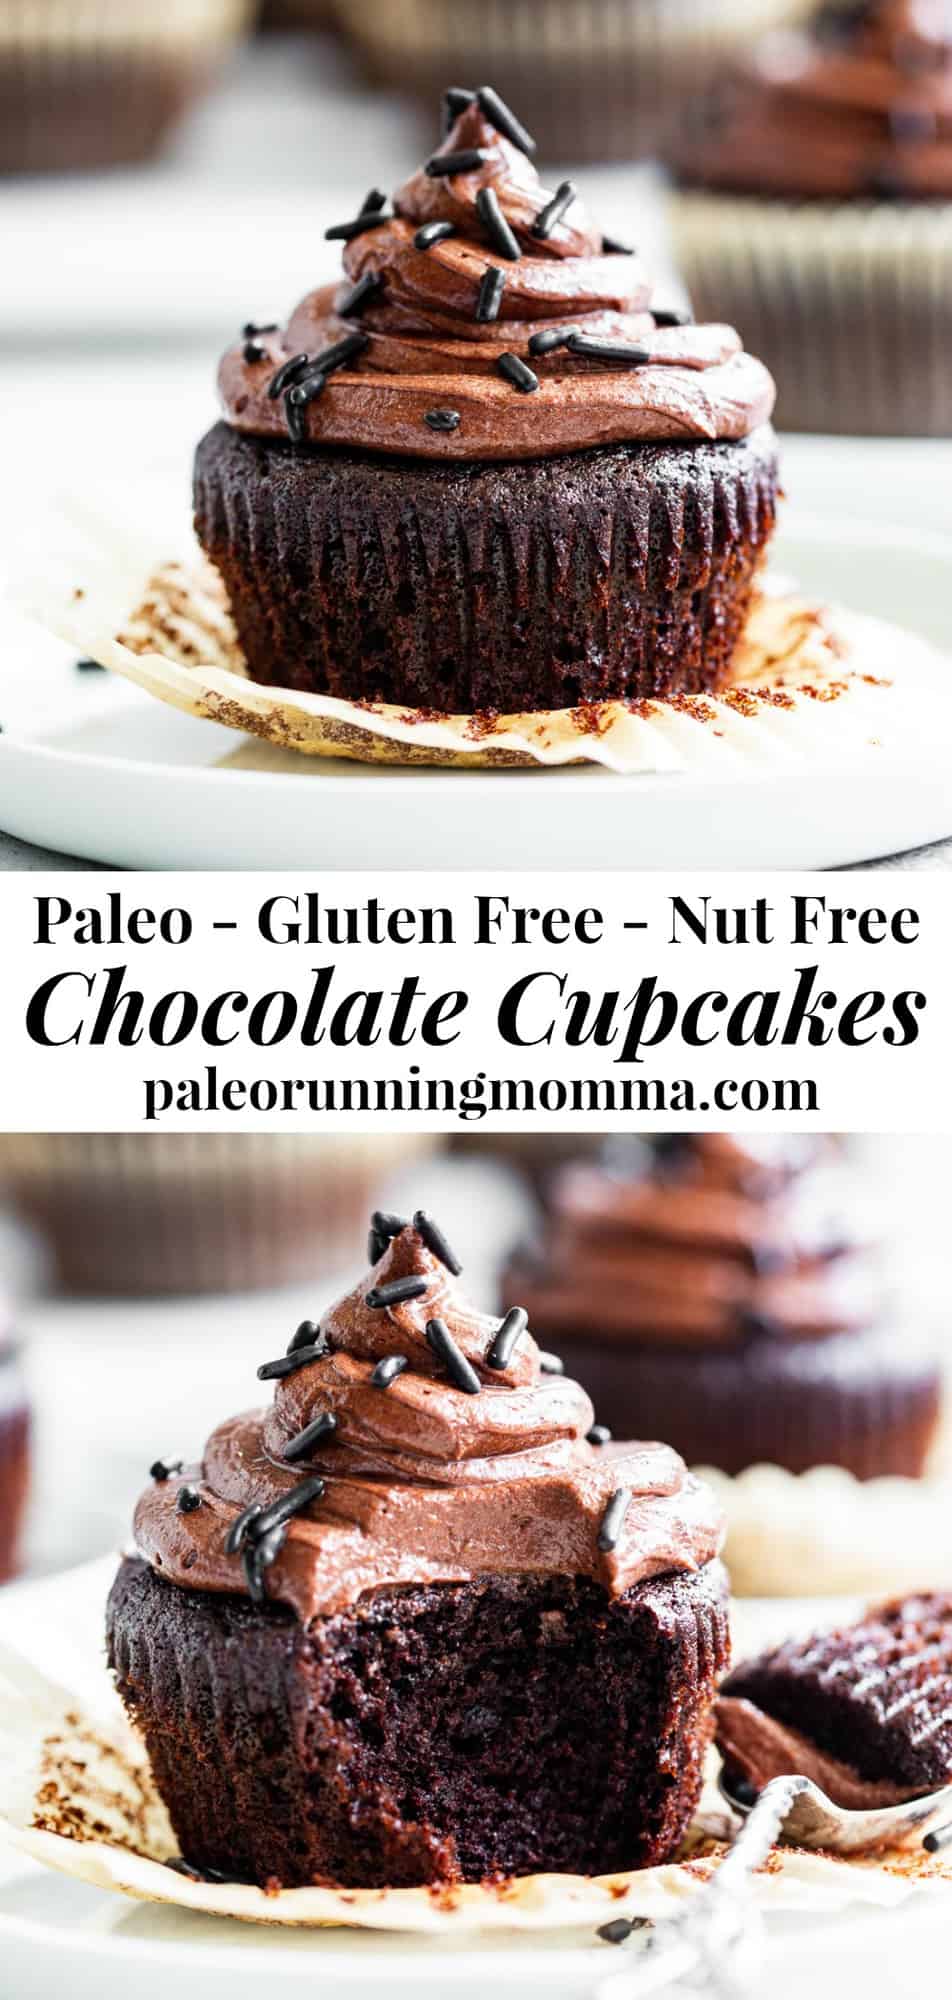 Paleo Chocolate Cupcakes with Chocolate Frosting {Nut Free}